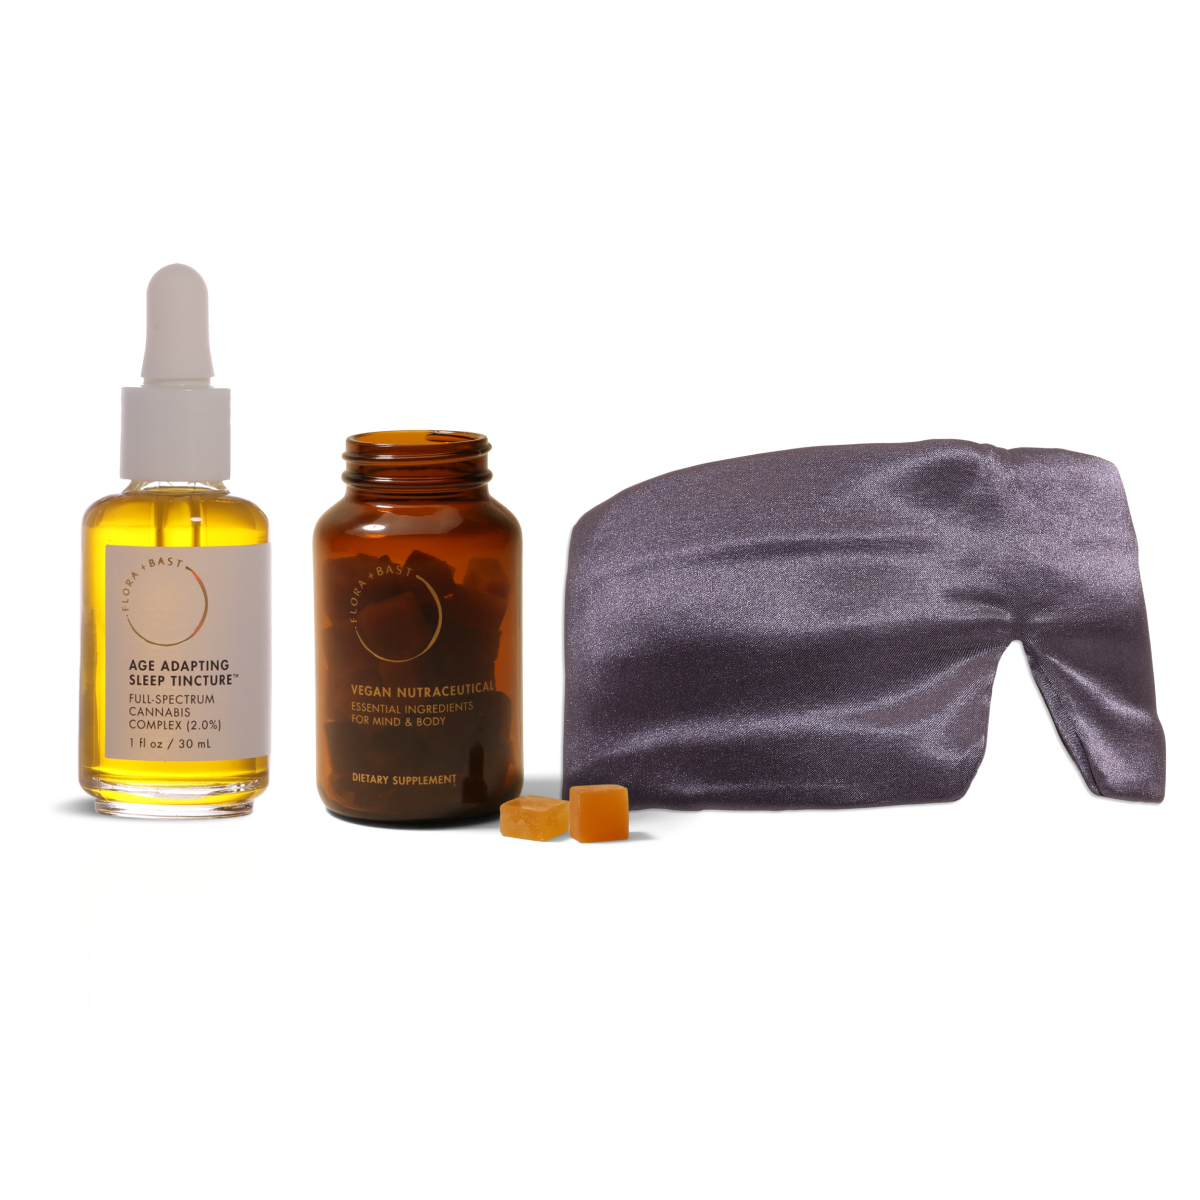 Regimen to improve sleep with ingestible gummies & tincture and a comfortable sleep mask to block light